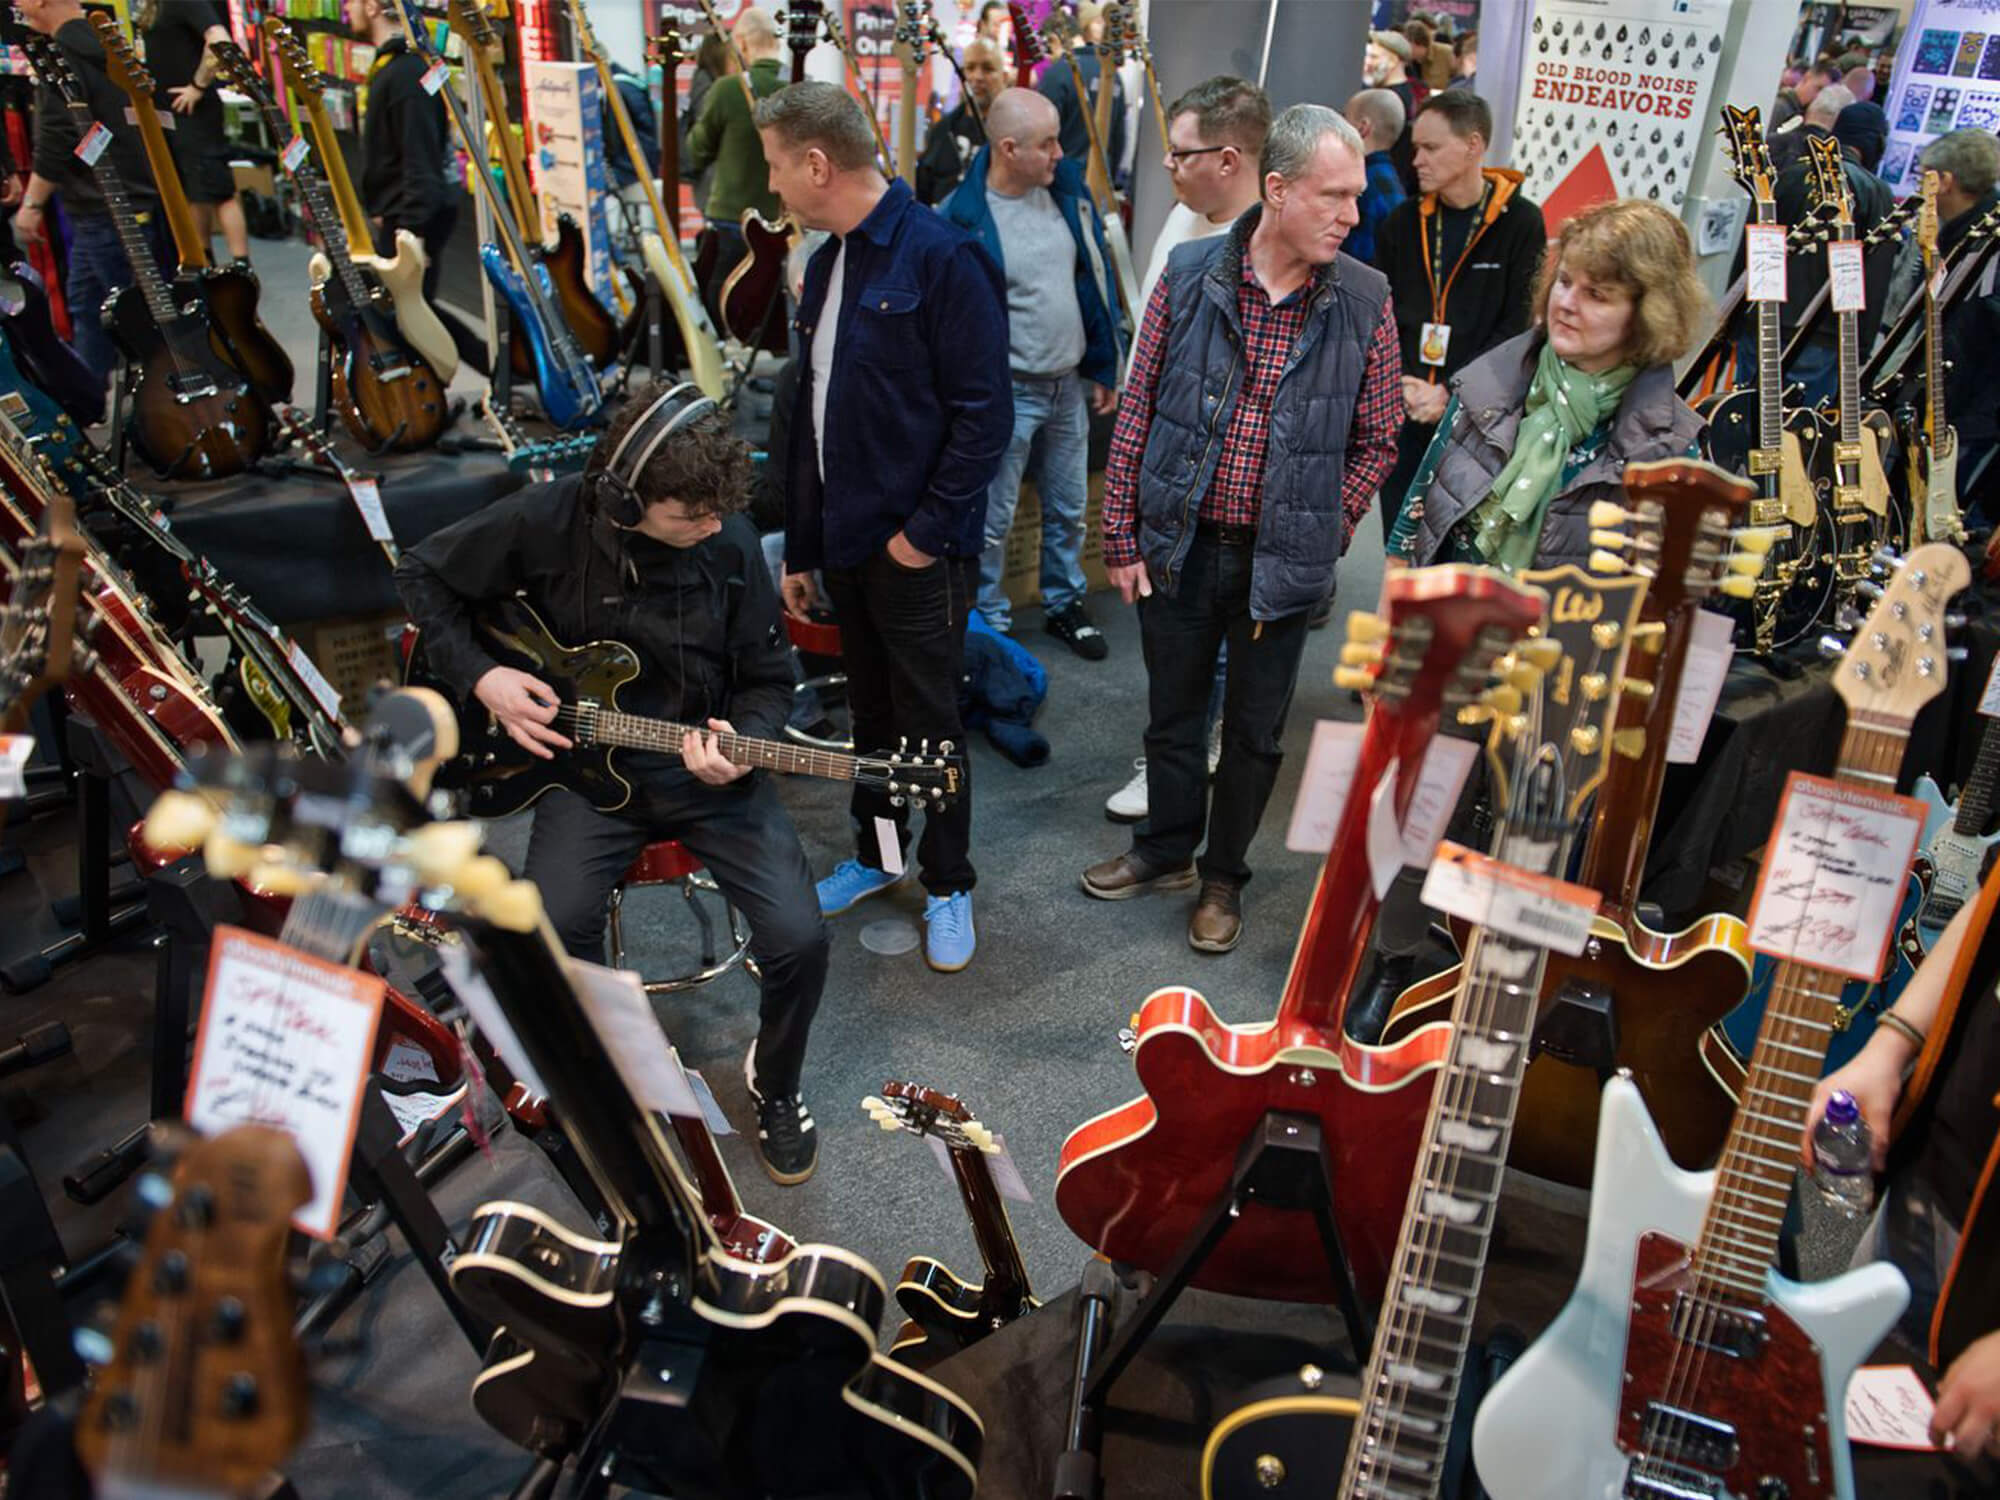 Exhibition at The Guitar show. There is a young person sat playing a guitar, with other people walking around near by. Lots of guitars are displayed on stands.